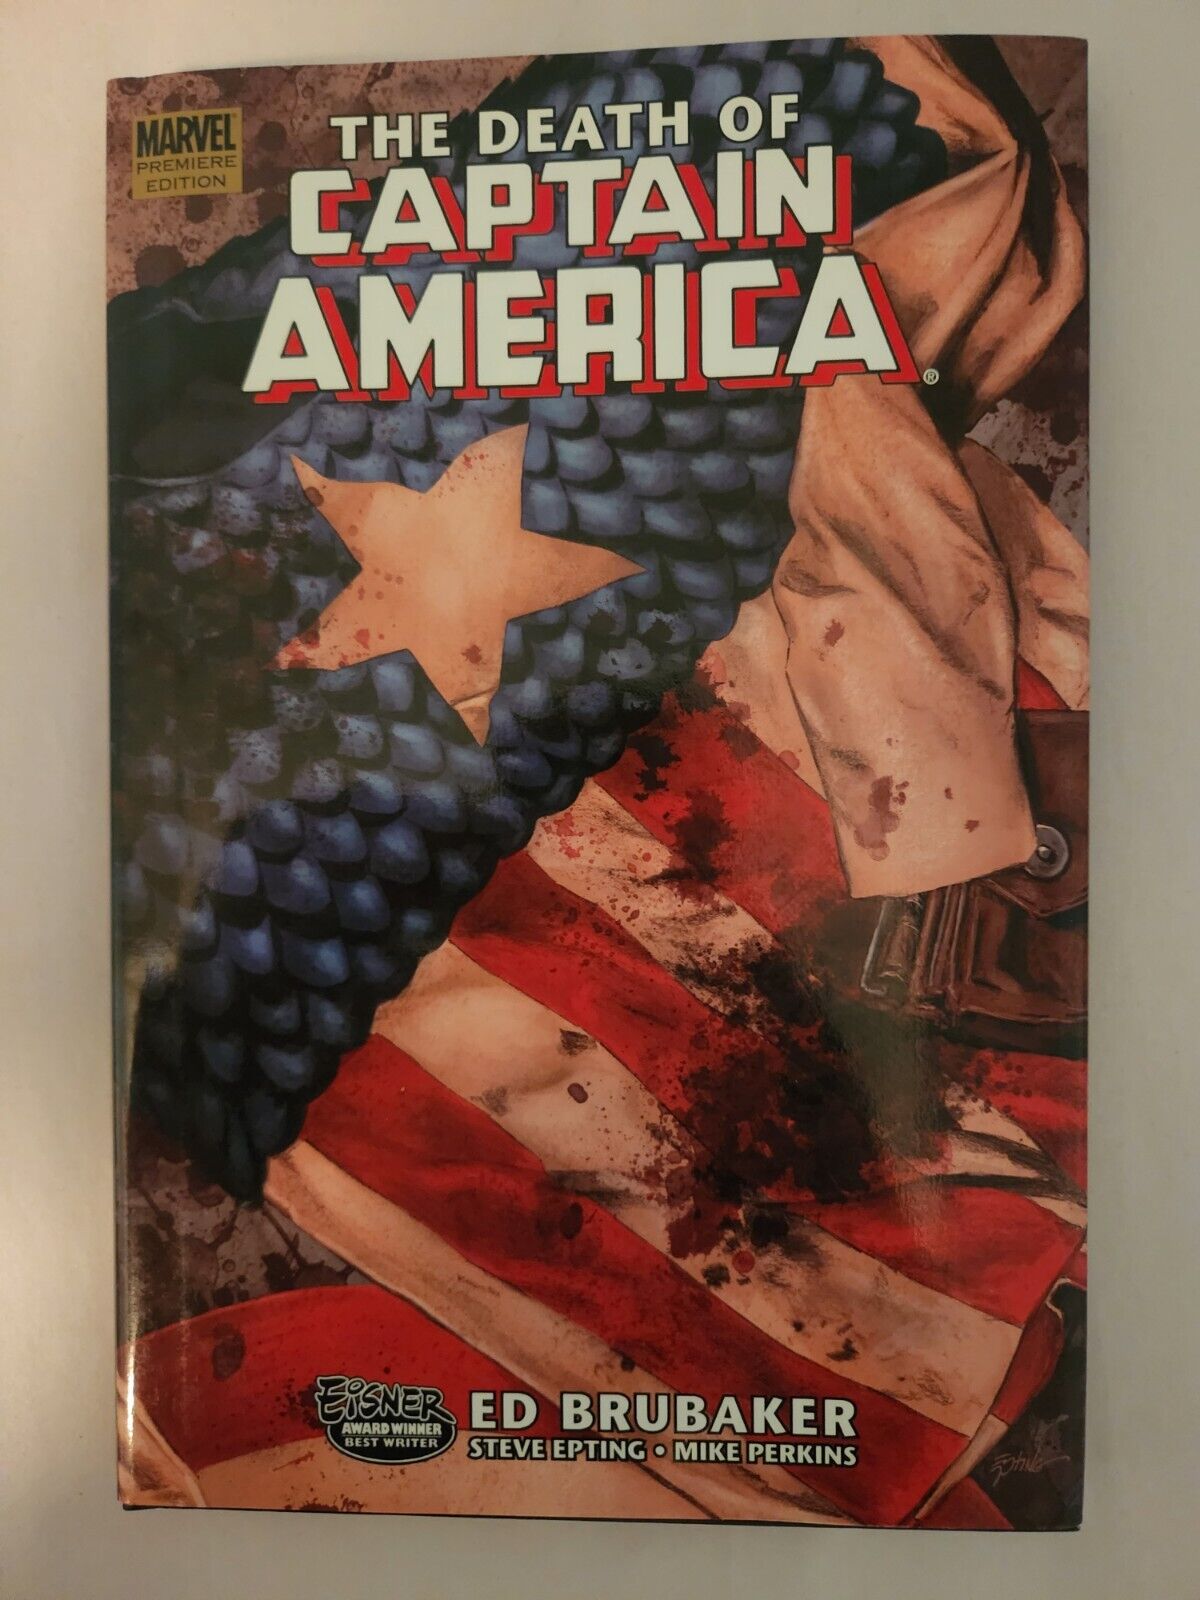 The Death of Captain America Vol 1 2007 Hardcover by Ed Brubaker First Edition